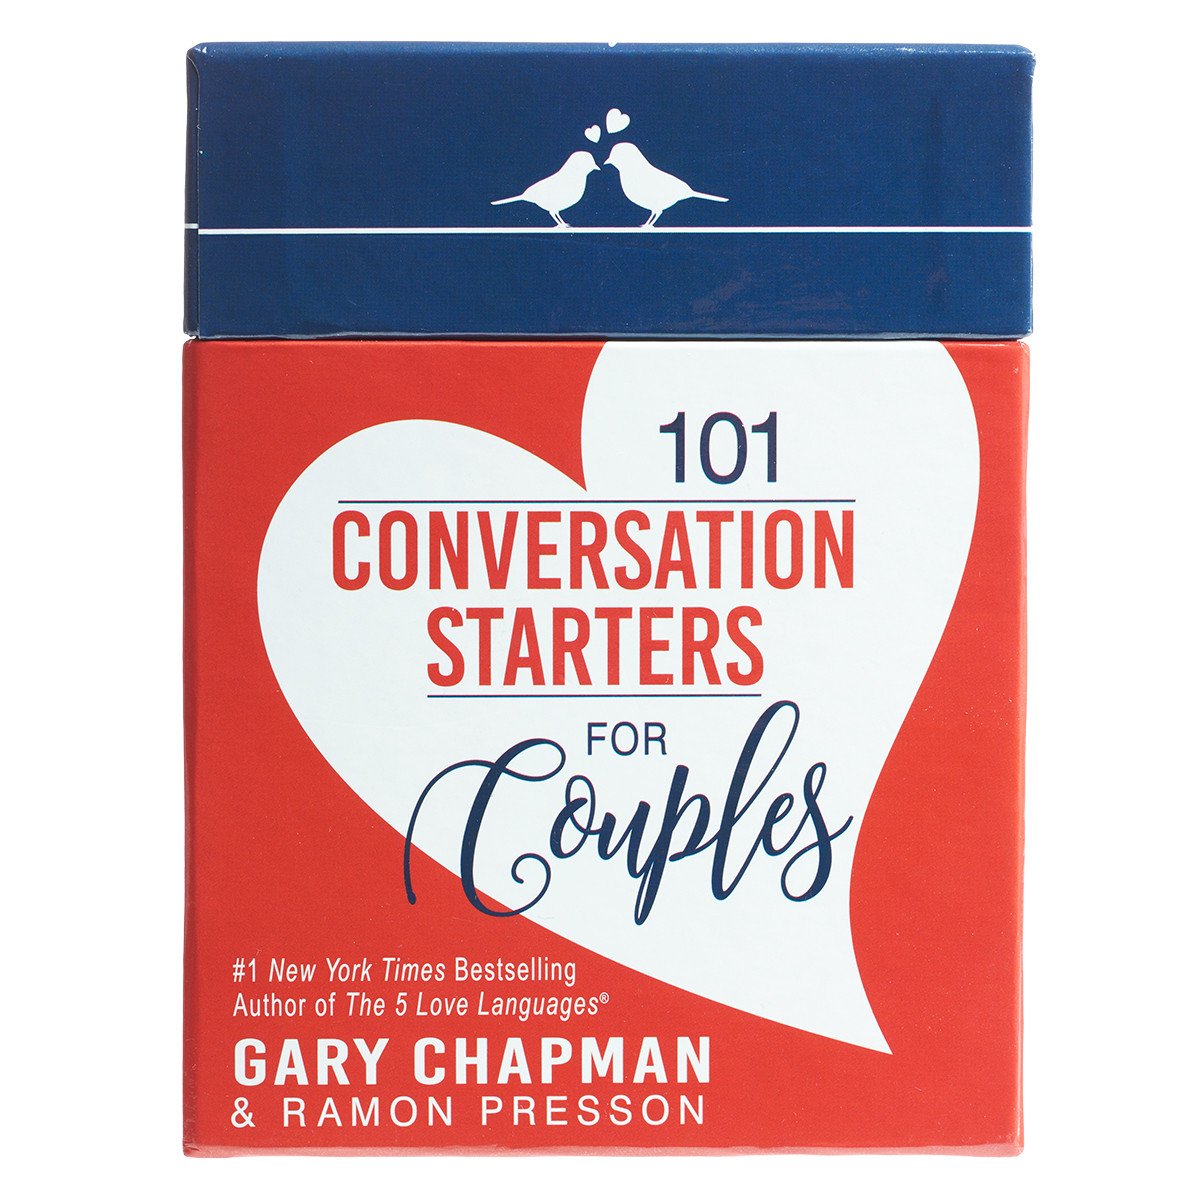  Conversation Starters for Couples